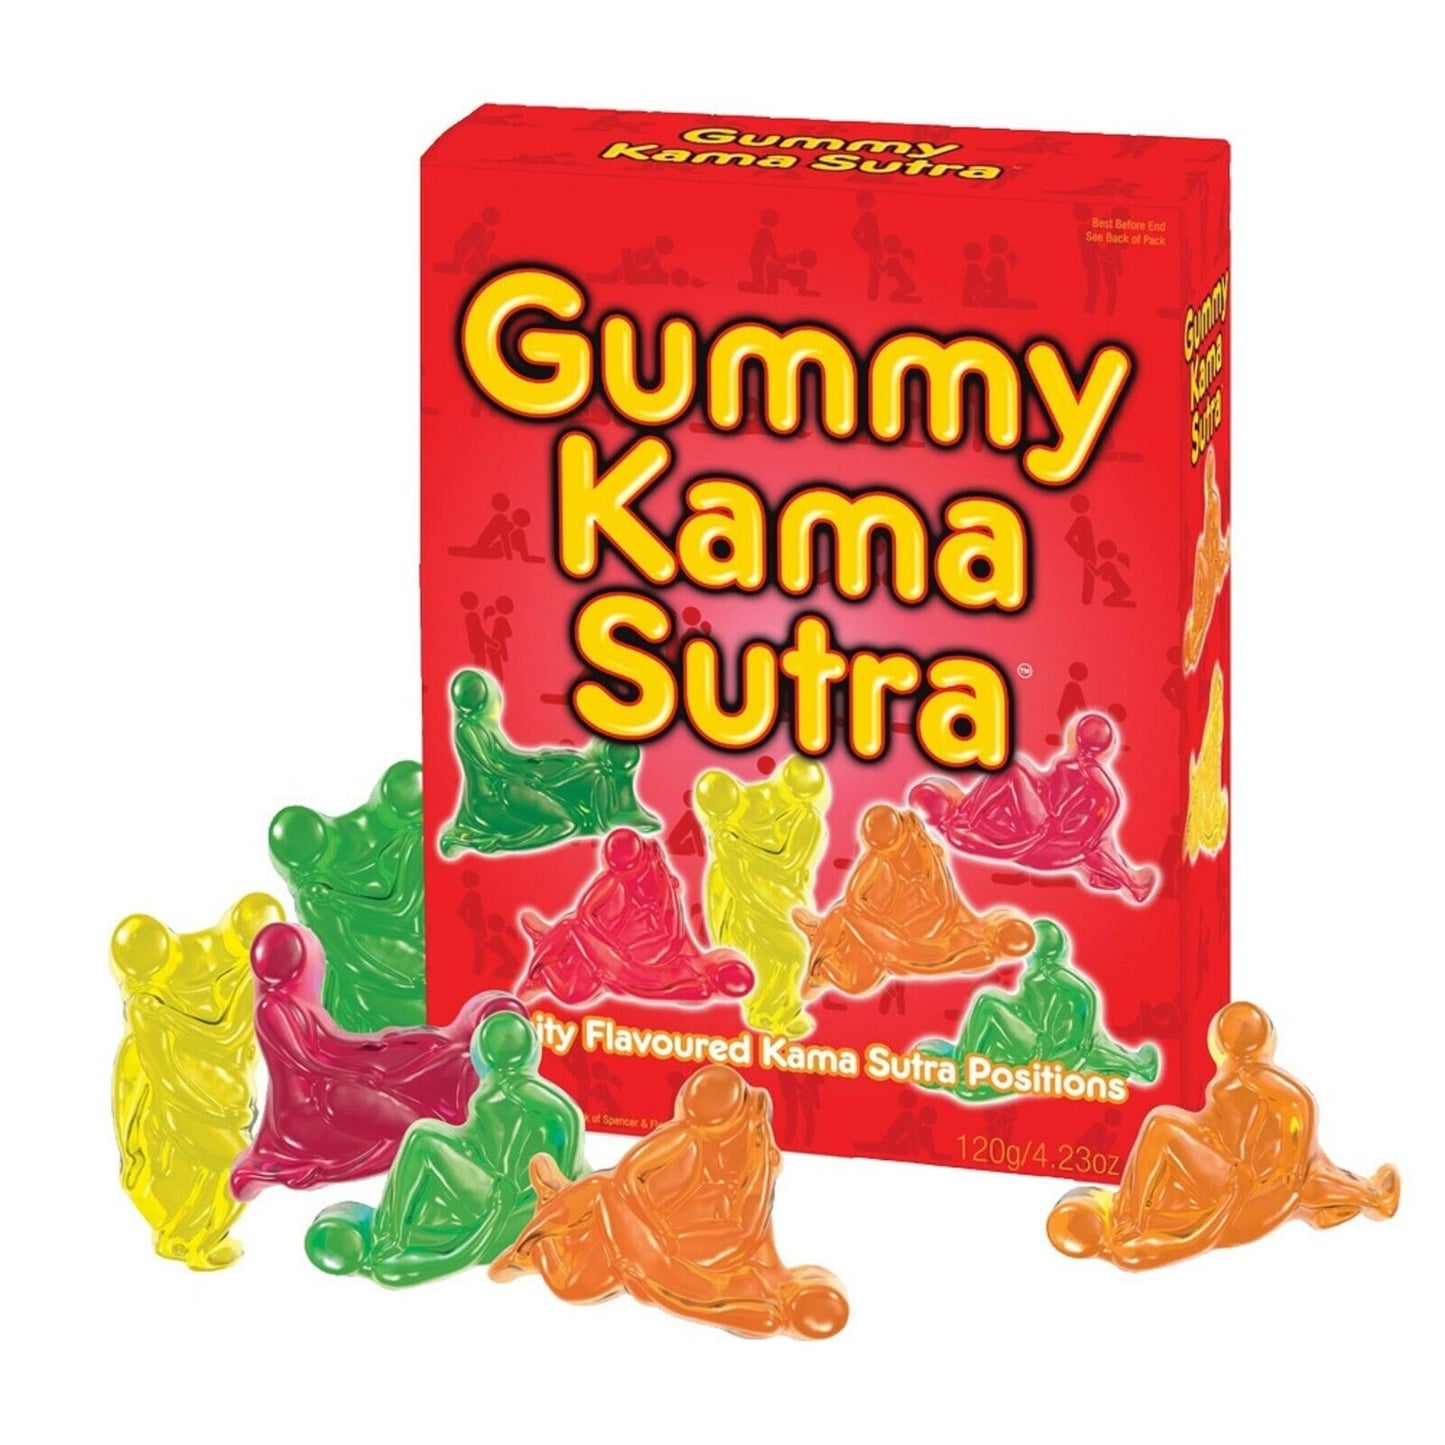 Gummy Kama Sutra Fruit Flavoured Sweets